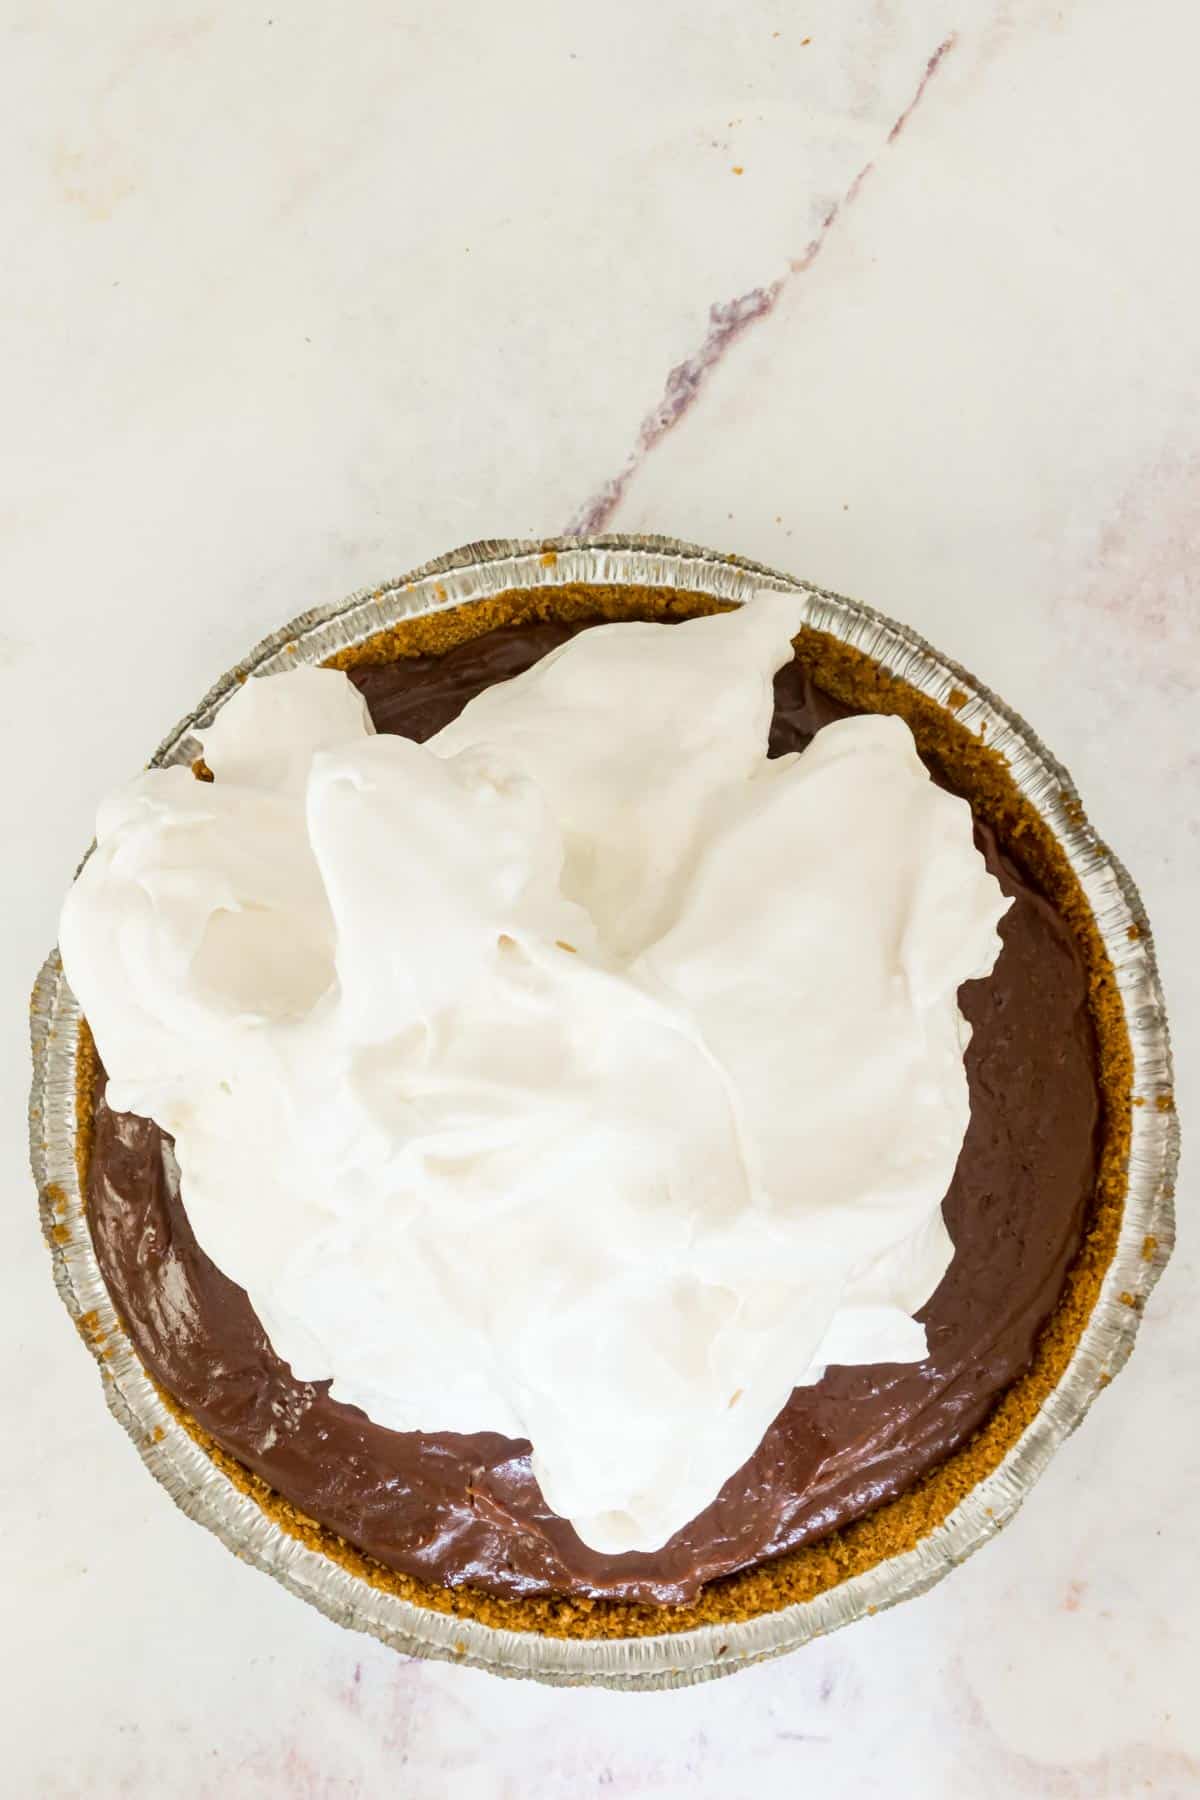 Marshmallow meringue added on top of chocolate pudding pie filling.